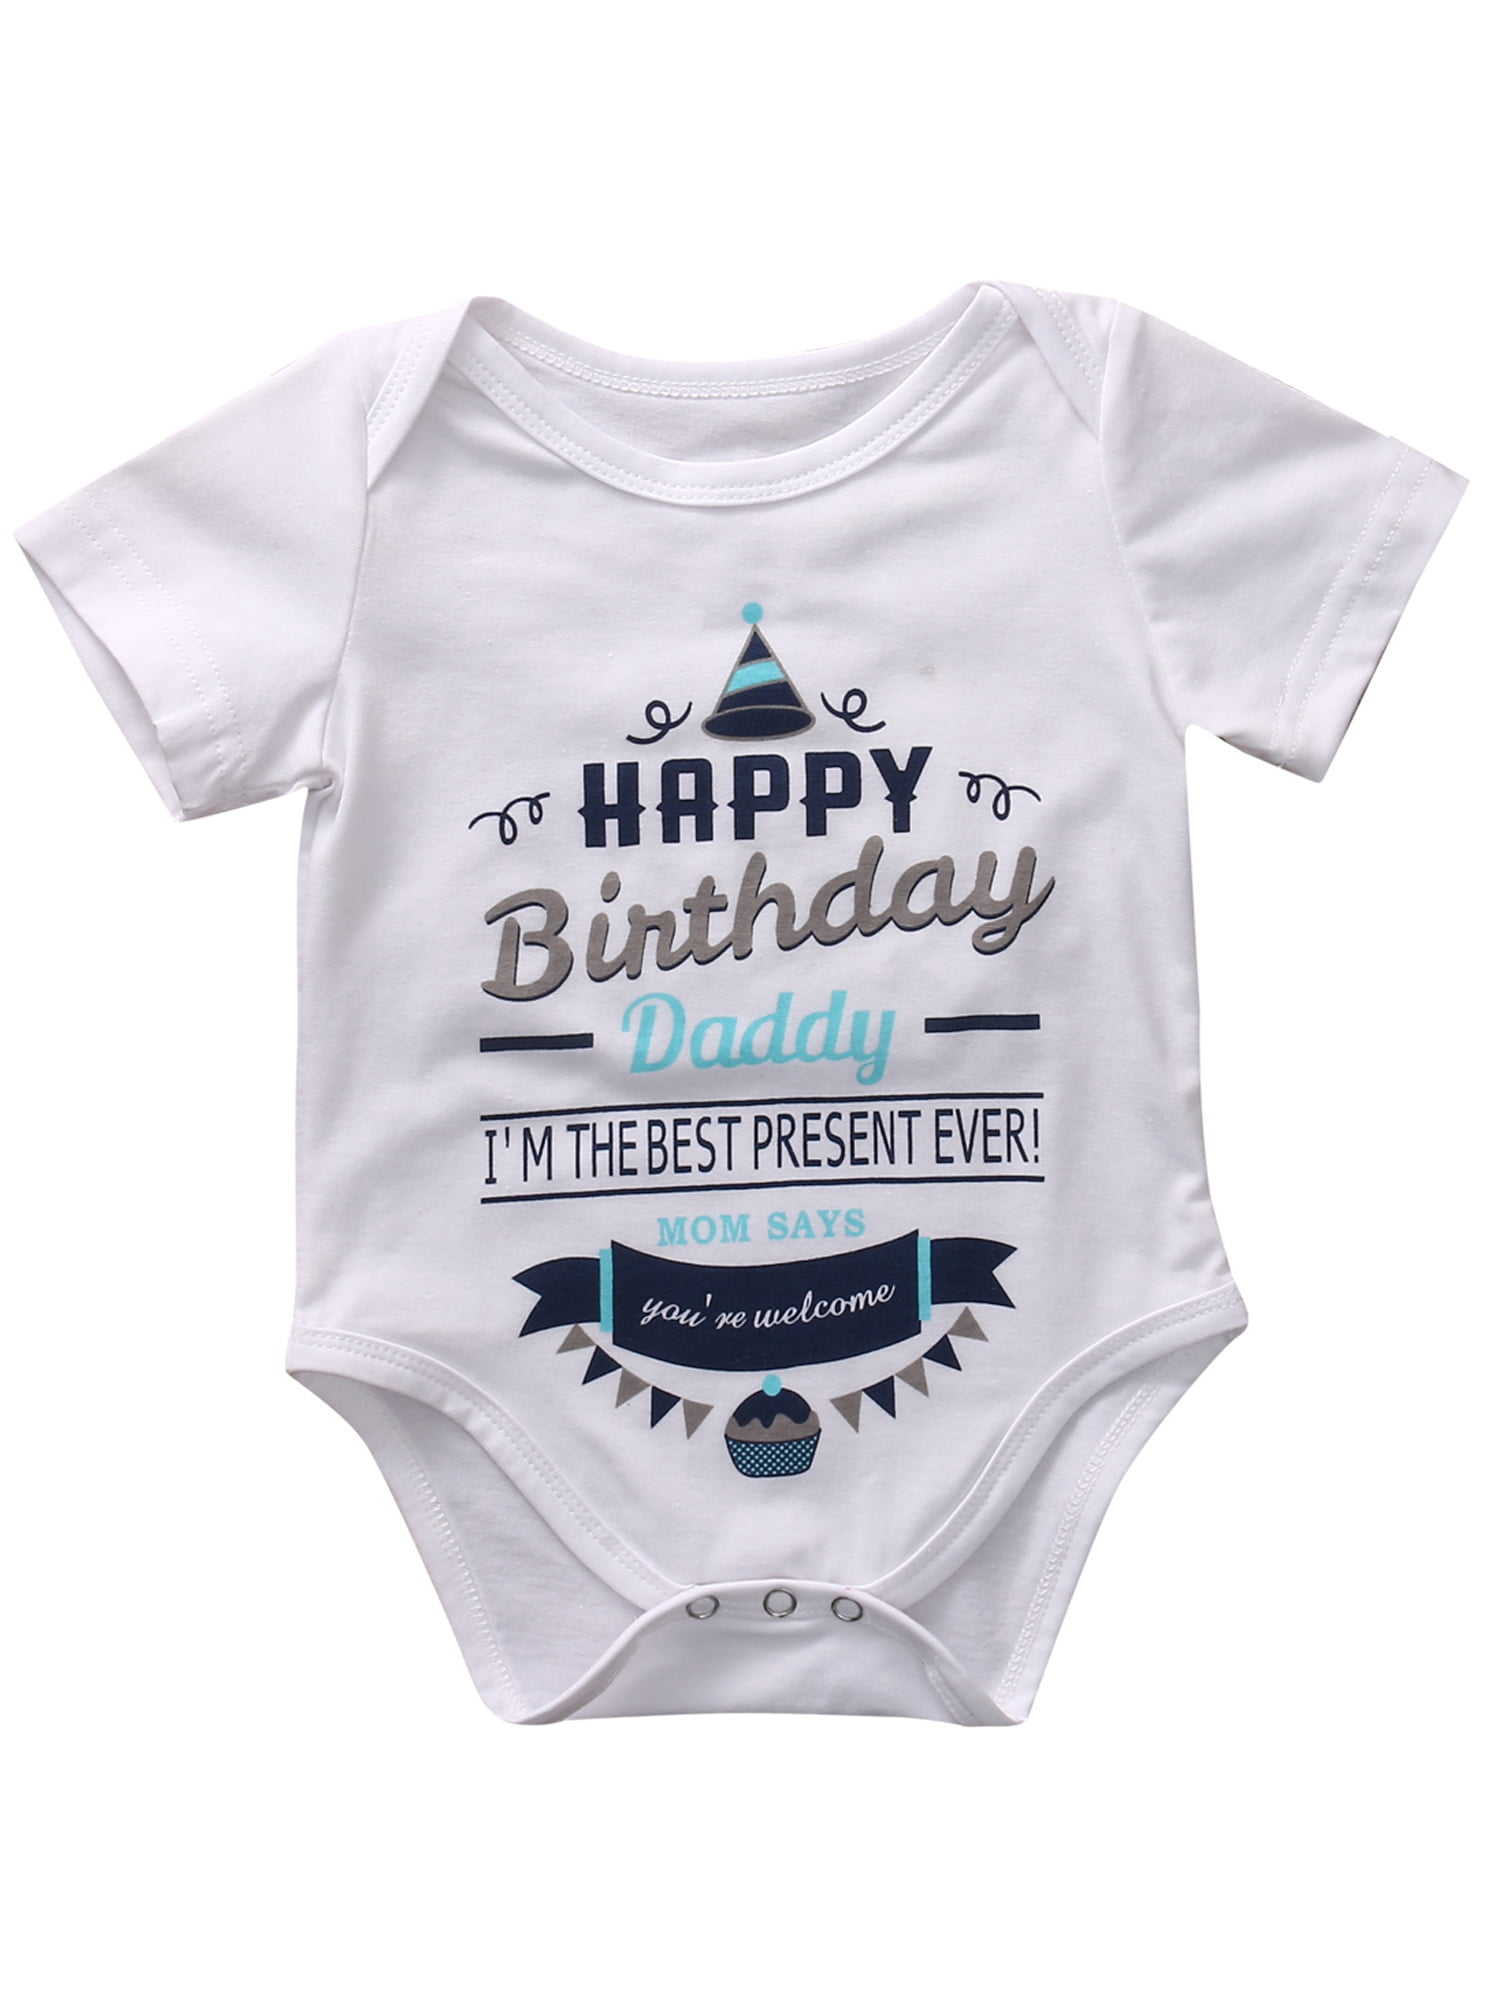 Happy 1st birthday as my Daddy red long sleeve rompersuit sleepsuit baby grow 